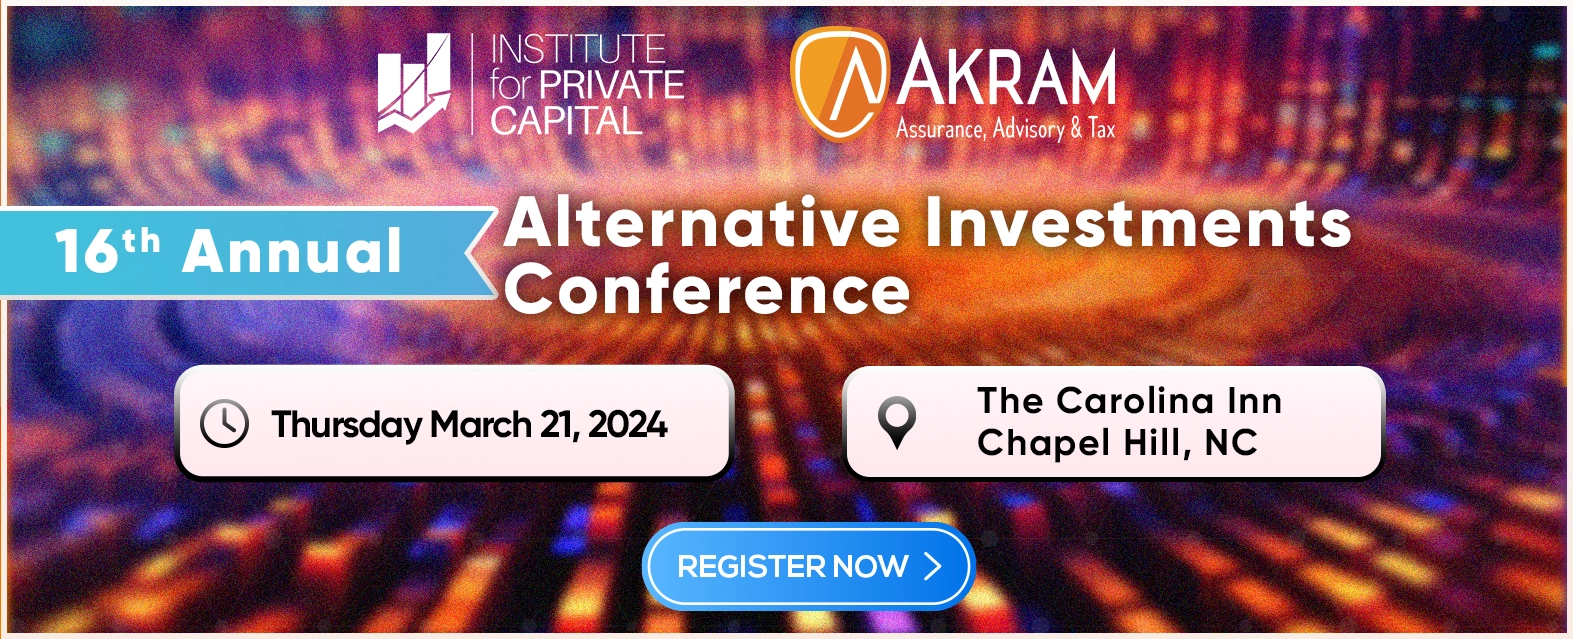 16th Annual Alternative Investments Conference 2024